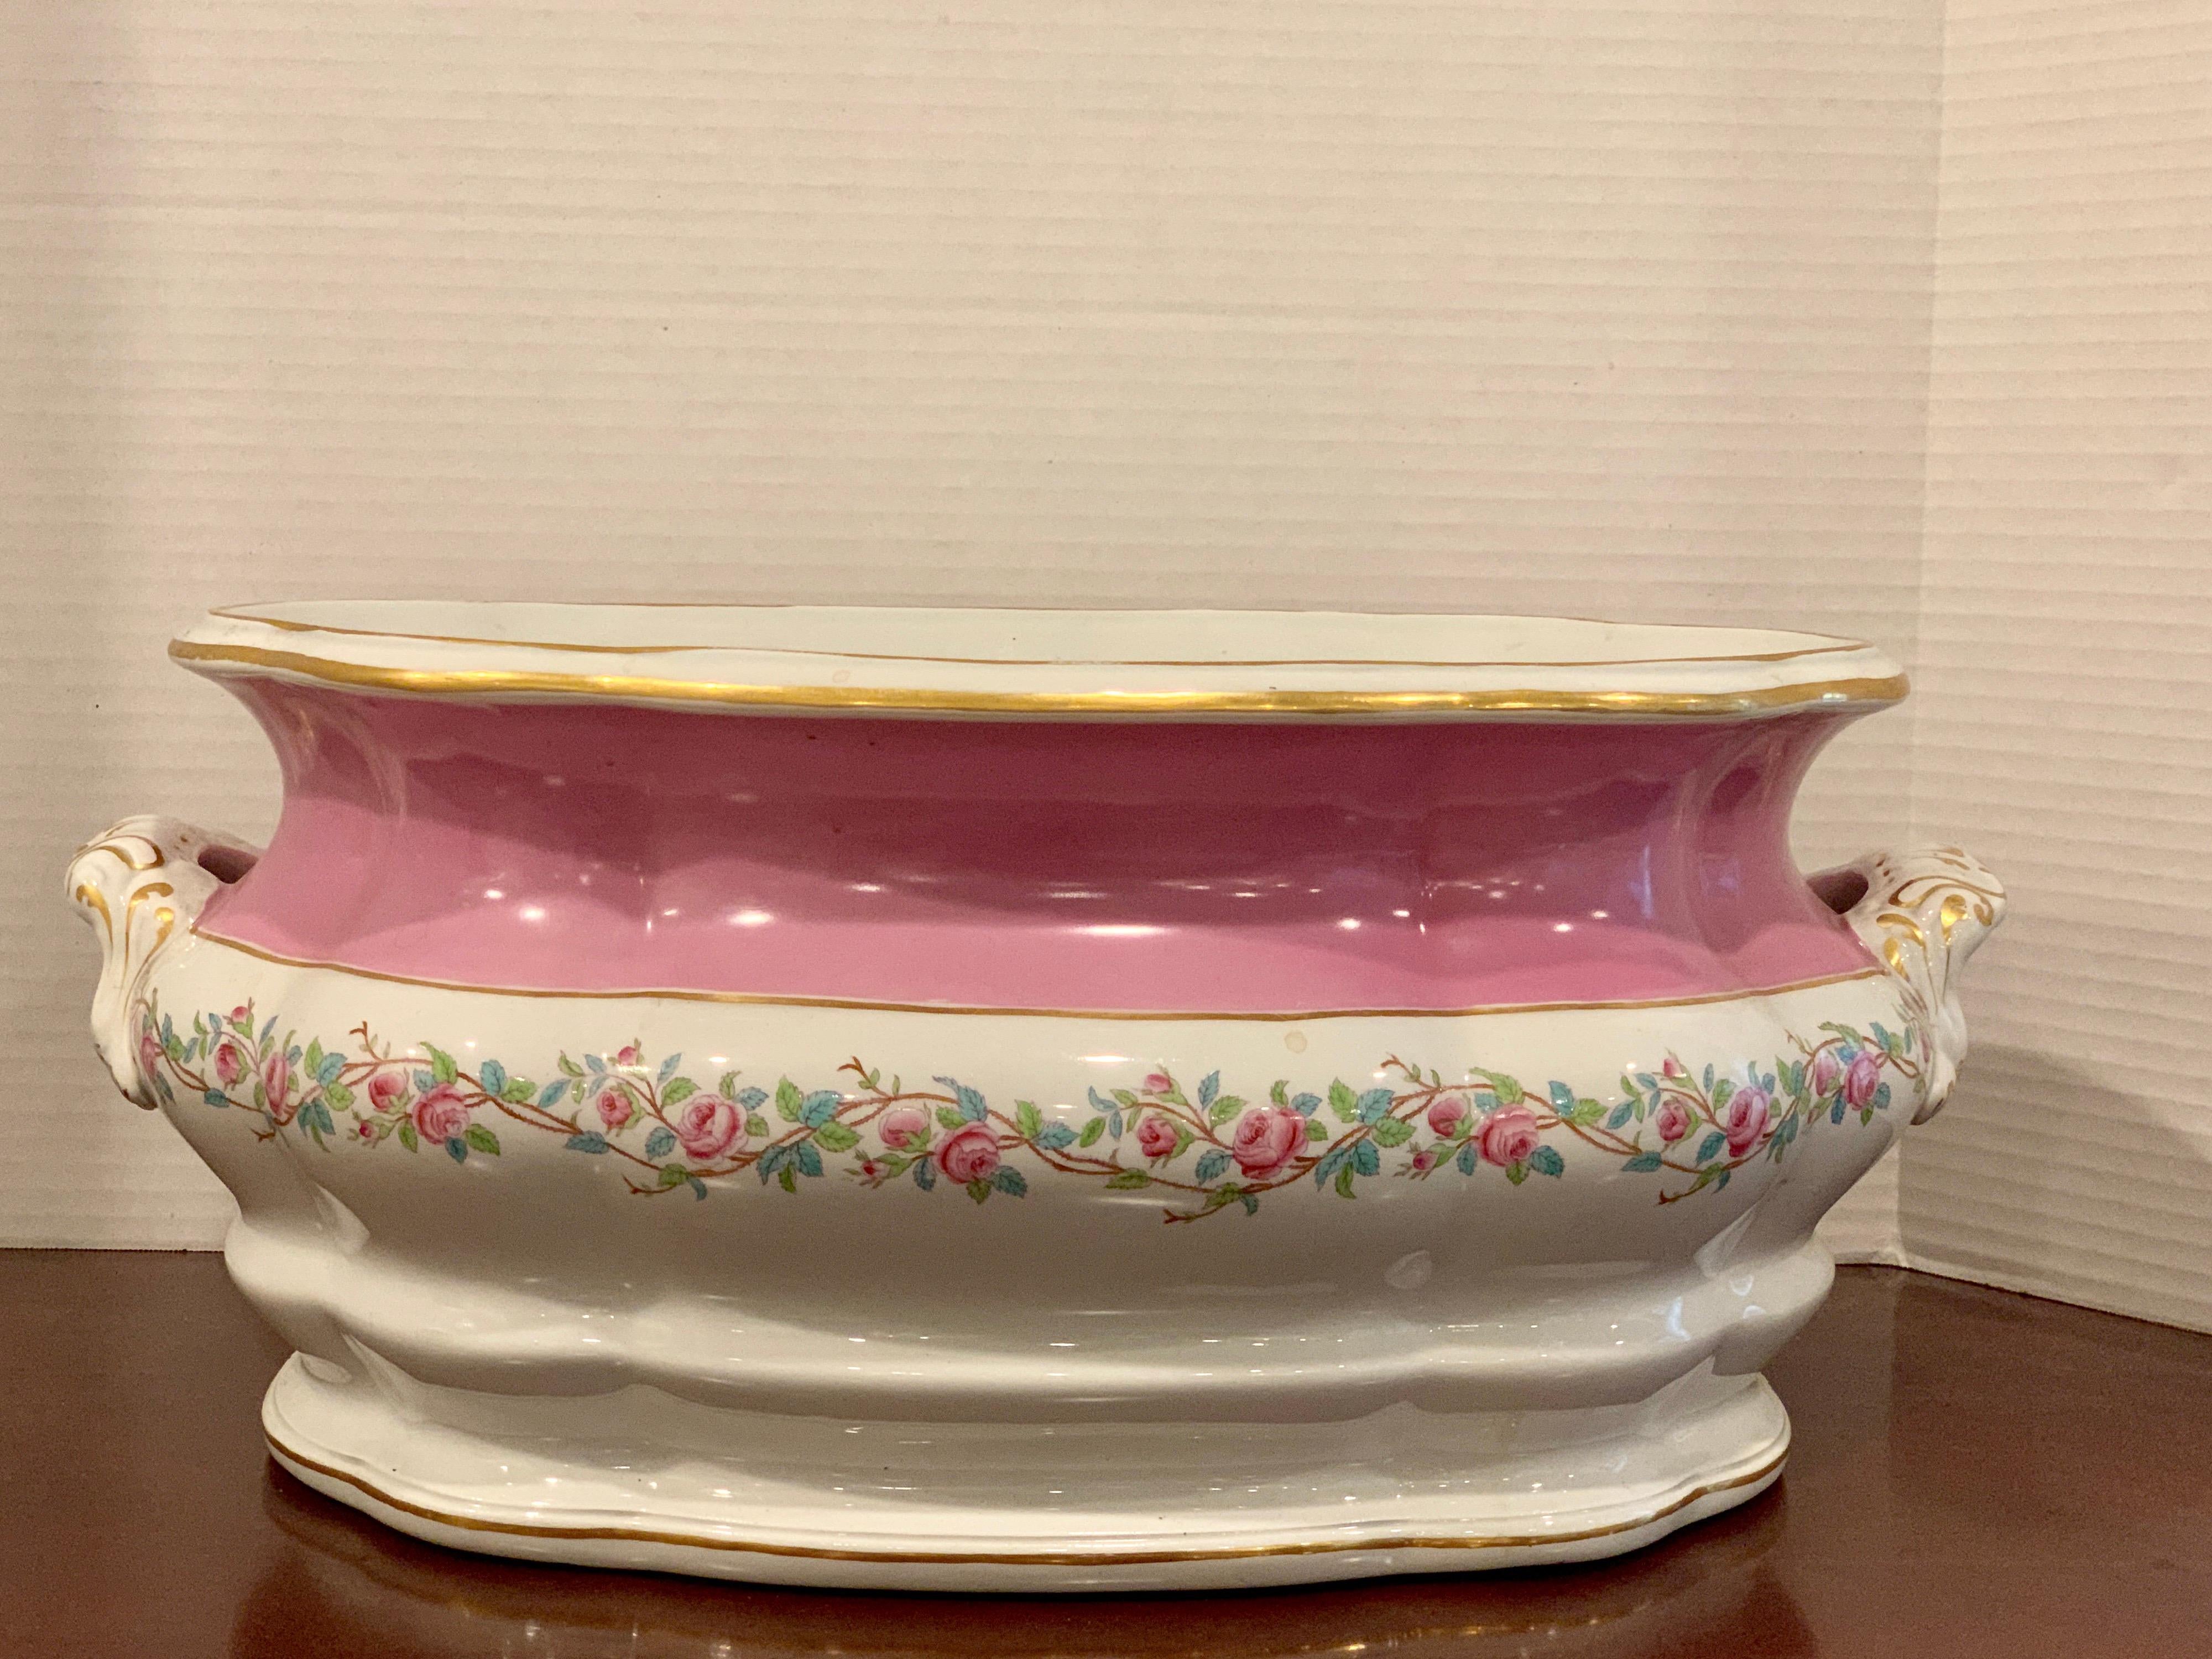 19th Century Pink Floral Porcelain Foot Bath, Attributed to Mintons For Sale 3